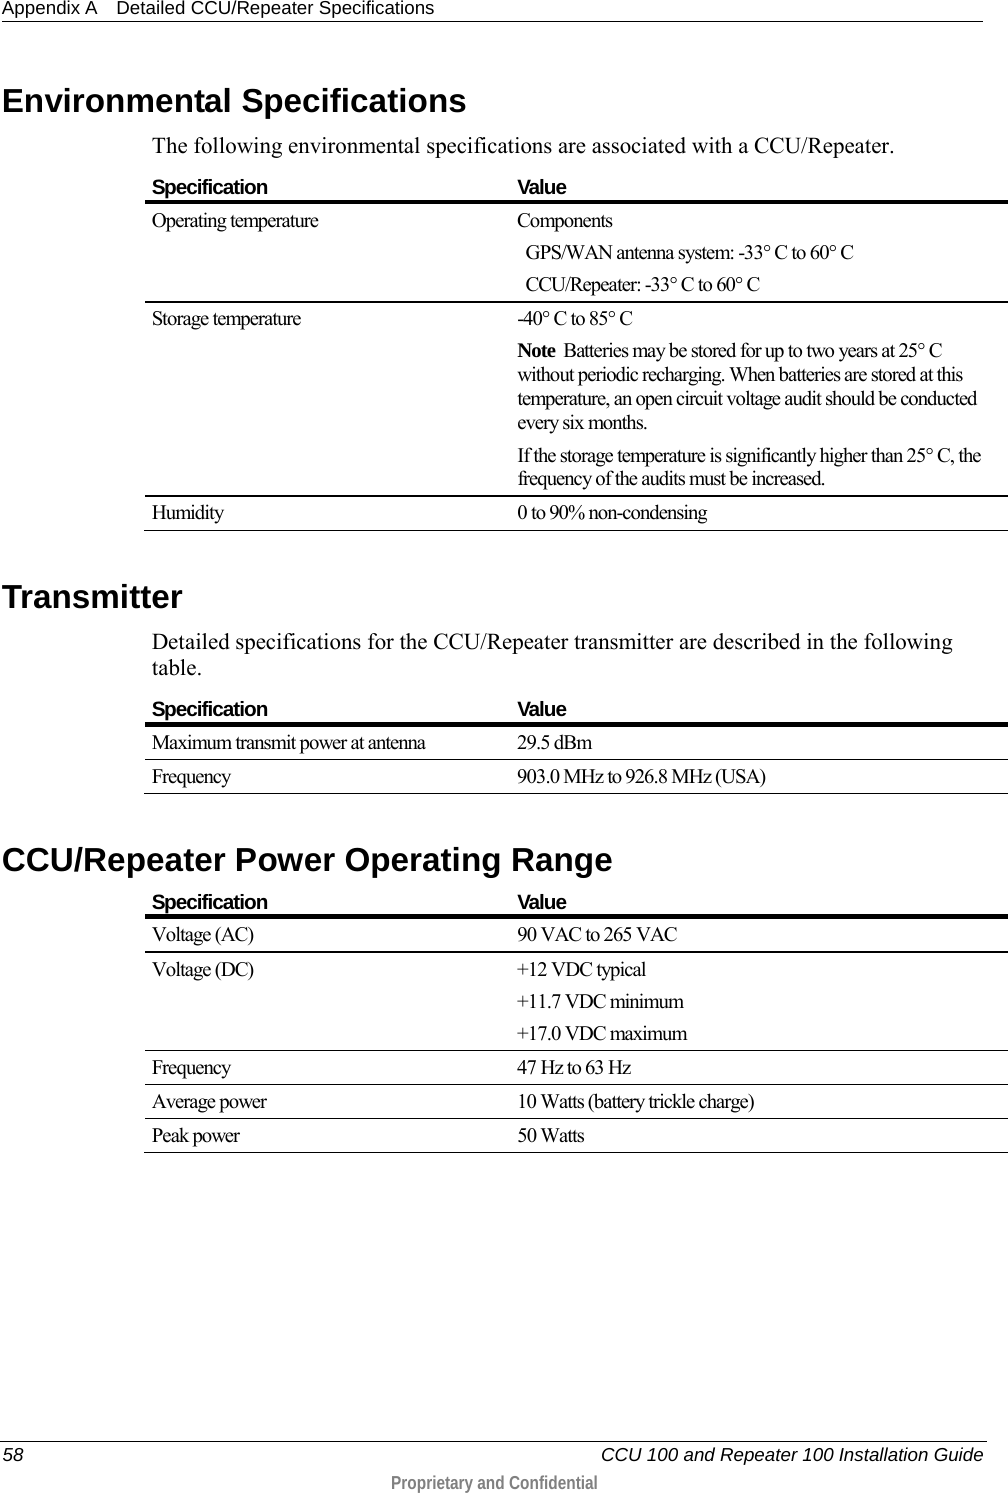 Appendix A Detailed CCU/Repeater Specifications  58   CCU 100 and Repeater 100 Installation Guide  Proprietary and Confidential   Environmental Specifications The following environmental specifications are associated with a CCU/Repeater.  Specification Value Operating temperature Components    GPS/WAN antenna system: -33° C to 60° C   CCU/Repeater: -33° C to 60° C Storage temperature  -40° C to 85° C Note  Batteries may be stored for up to two years at 25° C without periodic recharging. When batteries are stored at this temperature, an open circuit voltage audit should be conducted every six months.  If the storage temperature is significantly higher than 25° C, the frequency of the audits must be increased.  Humidity 0 to 90% non-condensing    Transmitter Detailed specifications for the CCU/Repeater transmitter are described in the following table.  Specification Value Maximum transmit power at antenna 29.5 dBm Frequency 903.0 MHz to 926.8 MHz (USA)   CCU/Repeater Power Operating Range   Specification Value Voltage (AC) 90 VAC to 265 VAC Voltage (DC)  +12 VDC typical +11.7 VDC minimum +17.0 VDC maximum Frequency 47 Hz to 63 Hz  Average power 10 Watts (battery trickle charge) Peak power 50 Watts   